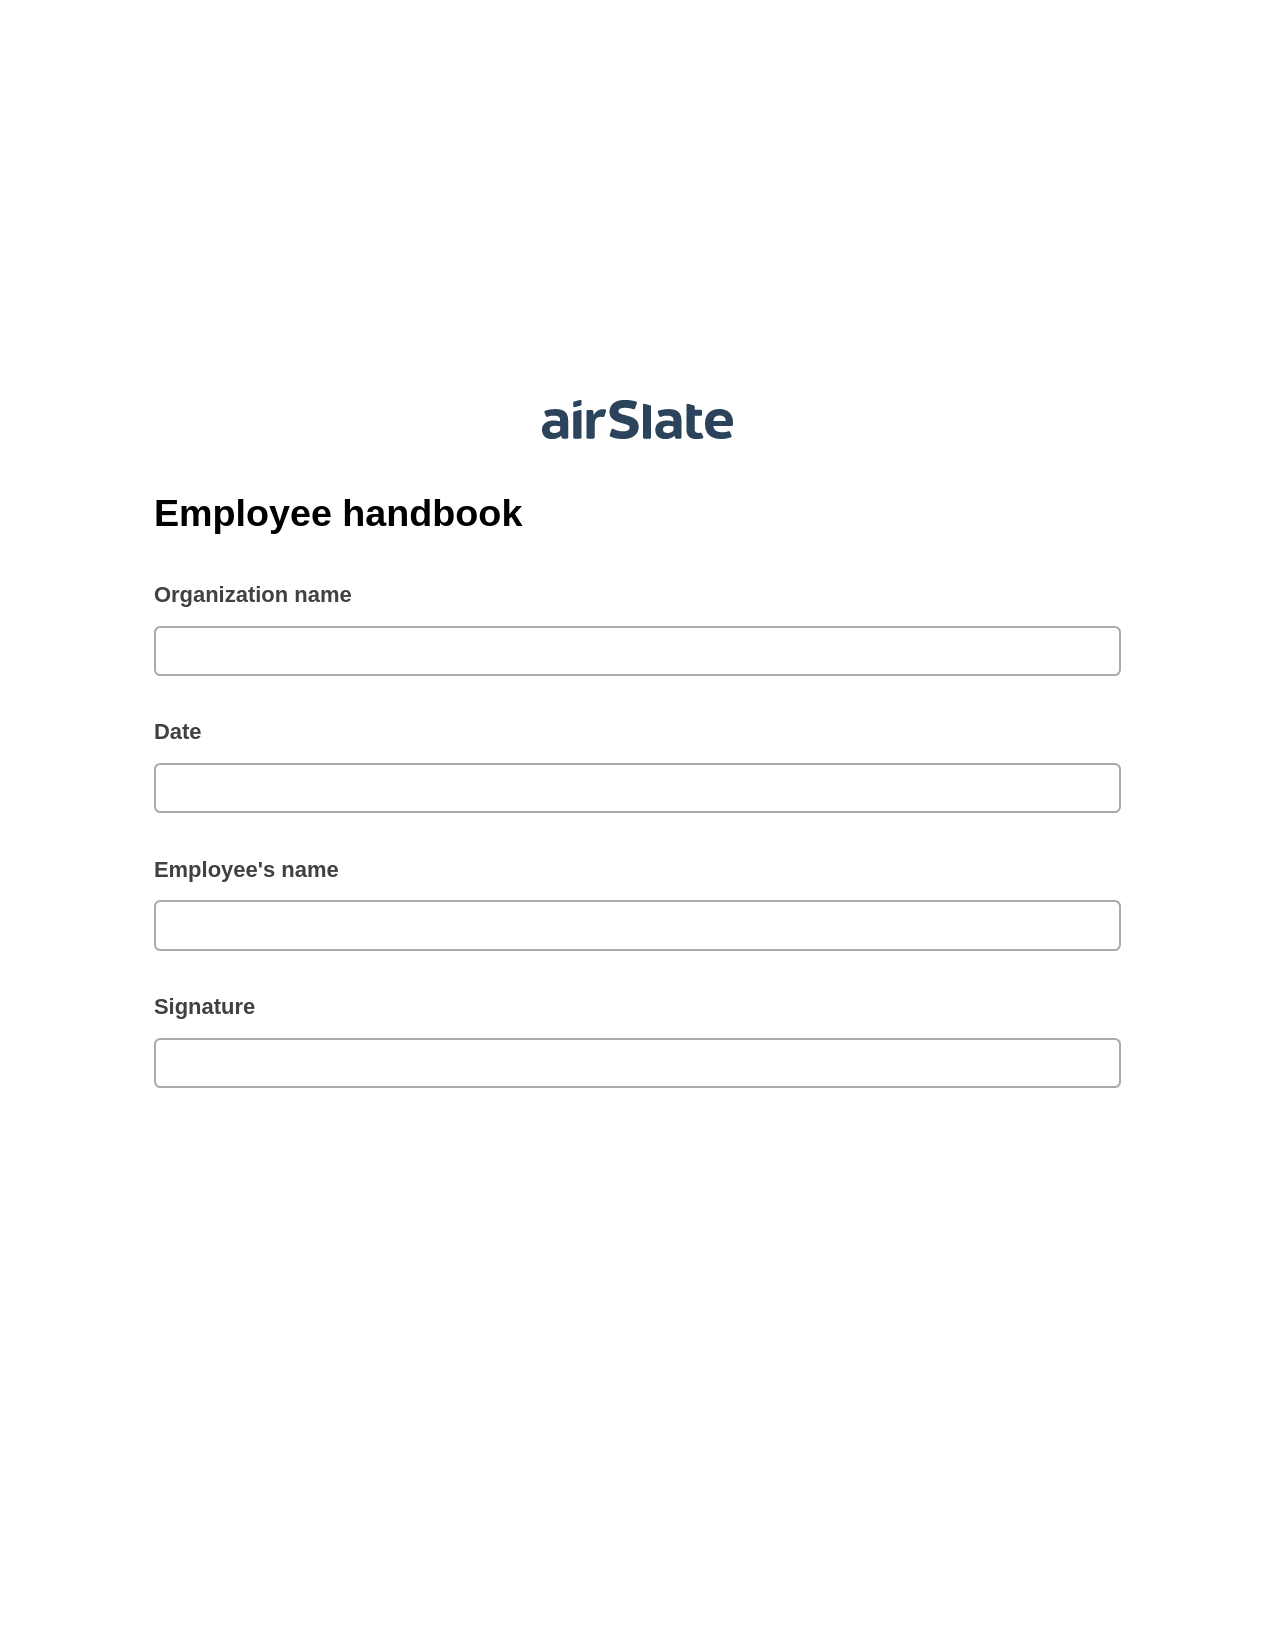 Multirole Employee handbook Pre-fill Dropdown from Airtable, Google Sheet Two-Way Binding Bot, Export to NetSuite Record Bot